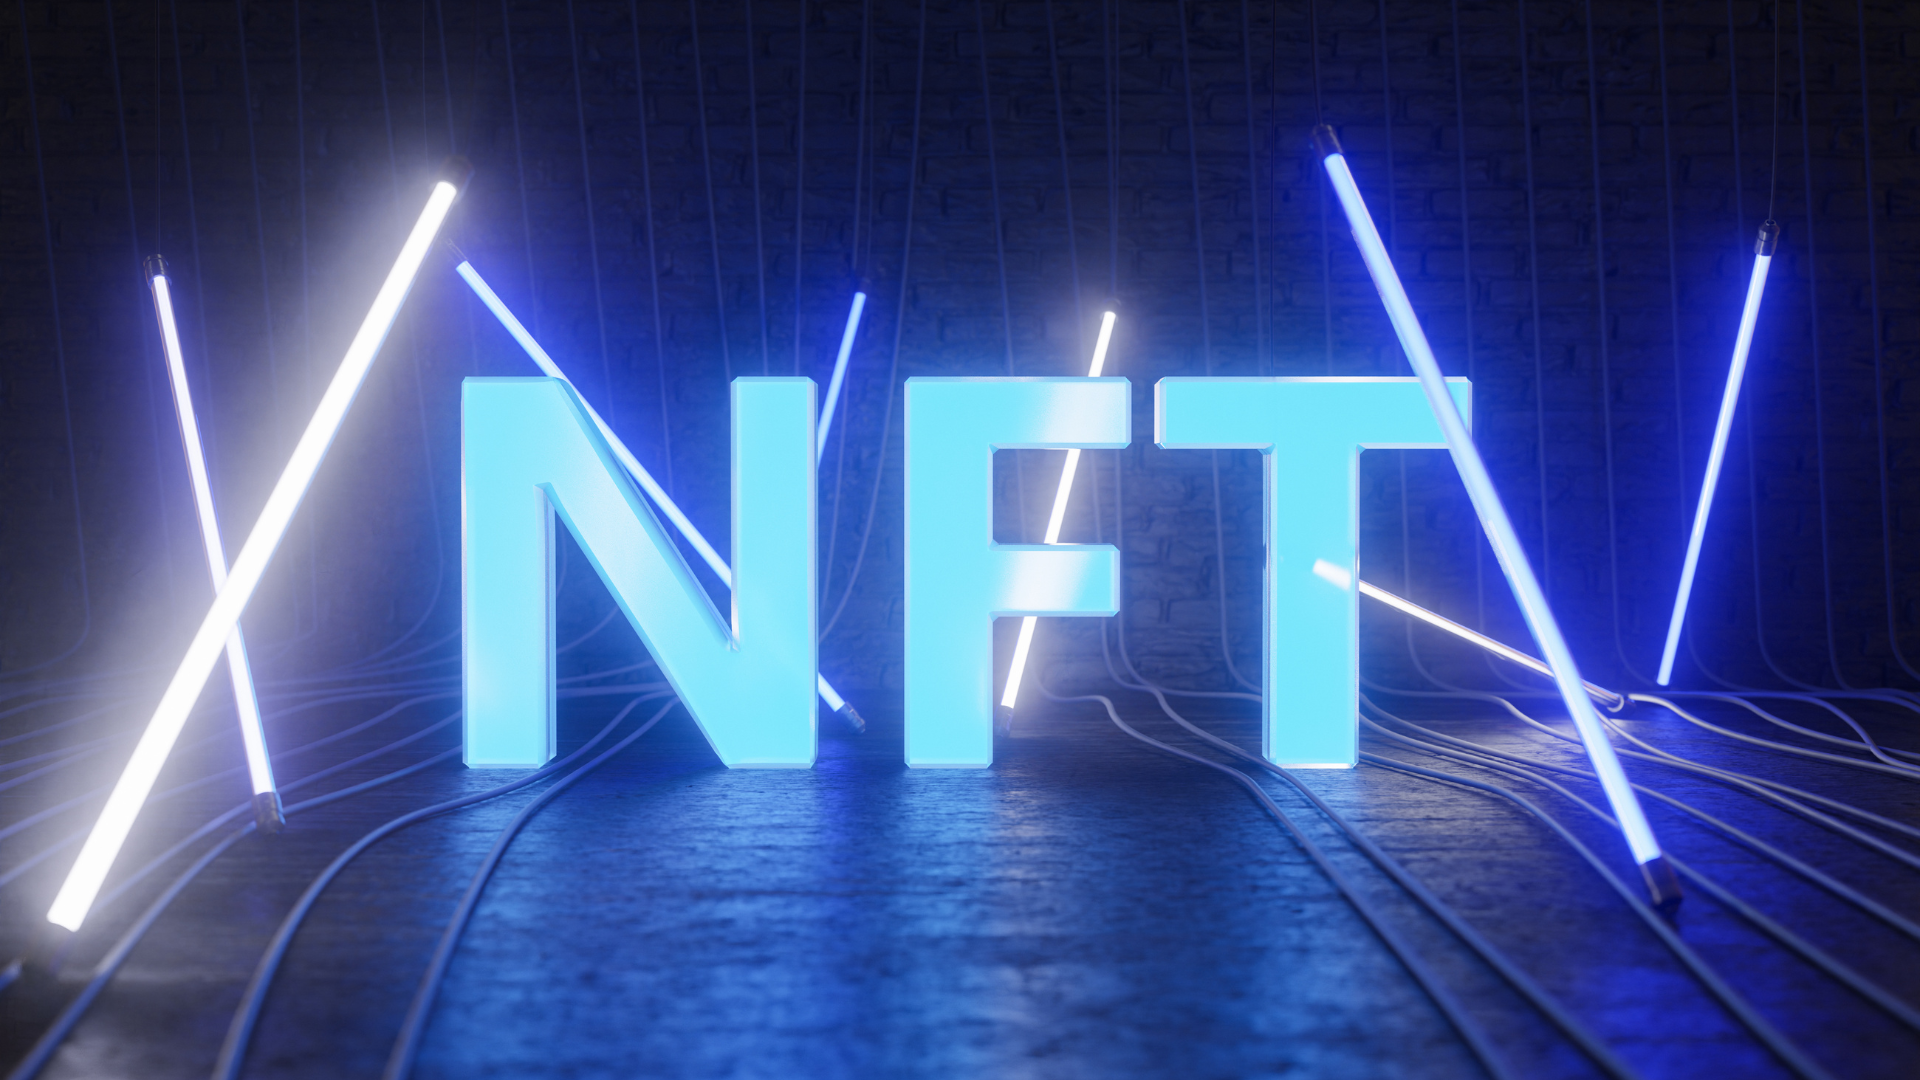 You are currently viewing 10 NFT Tips – Market and Sell your Artwork as NFTs